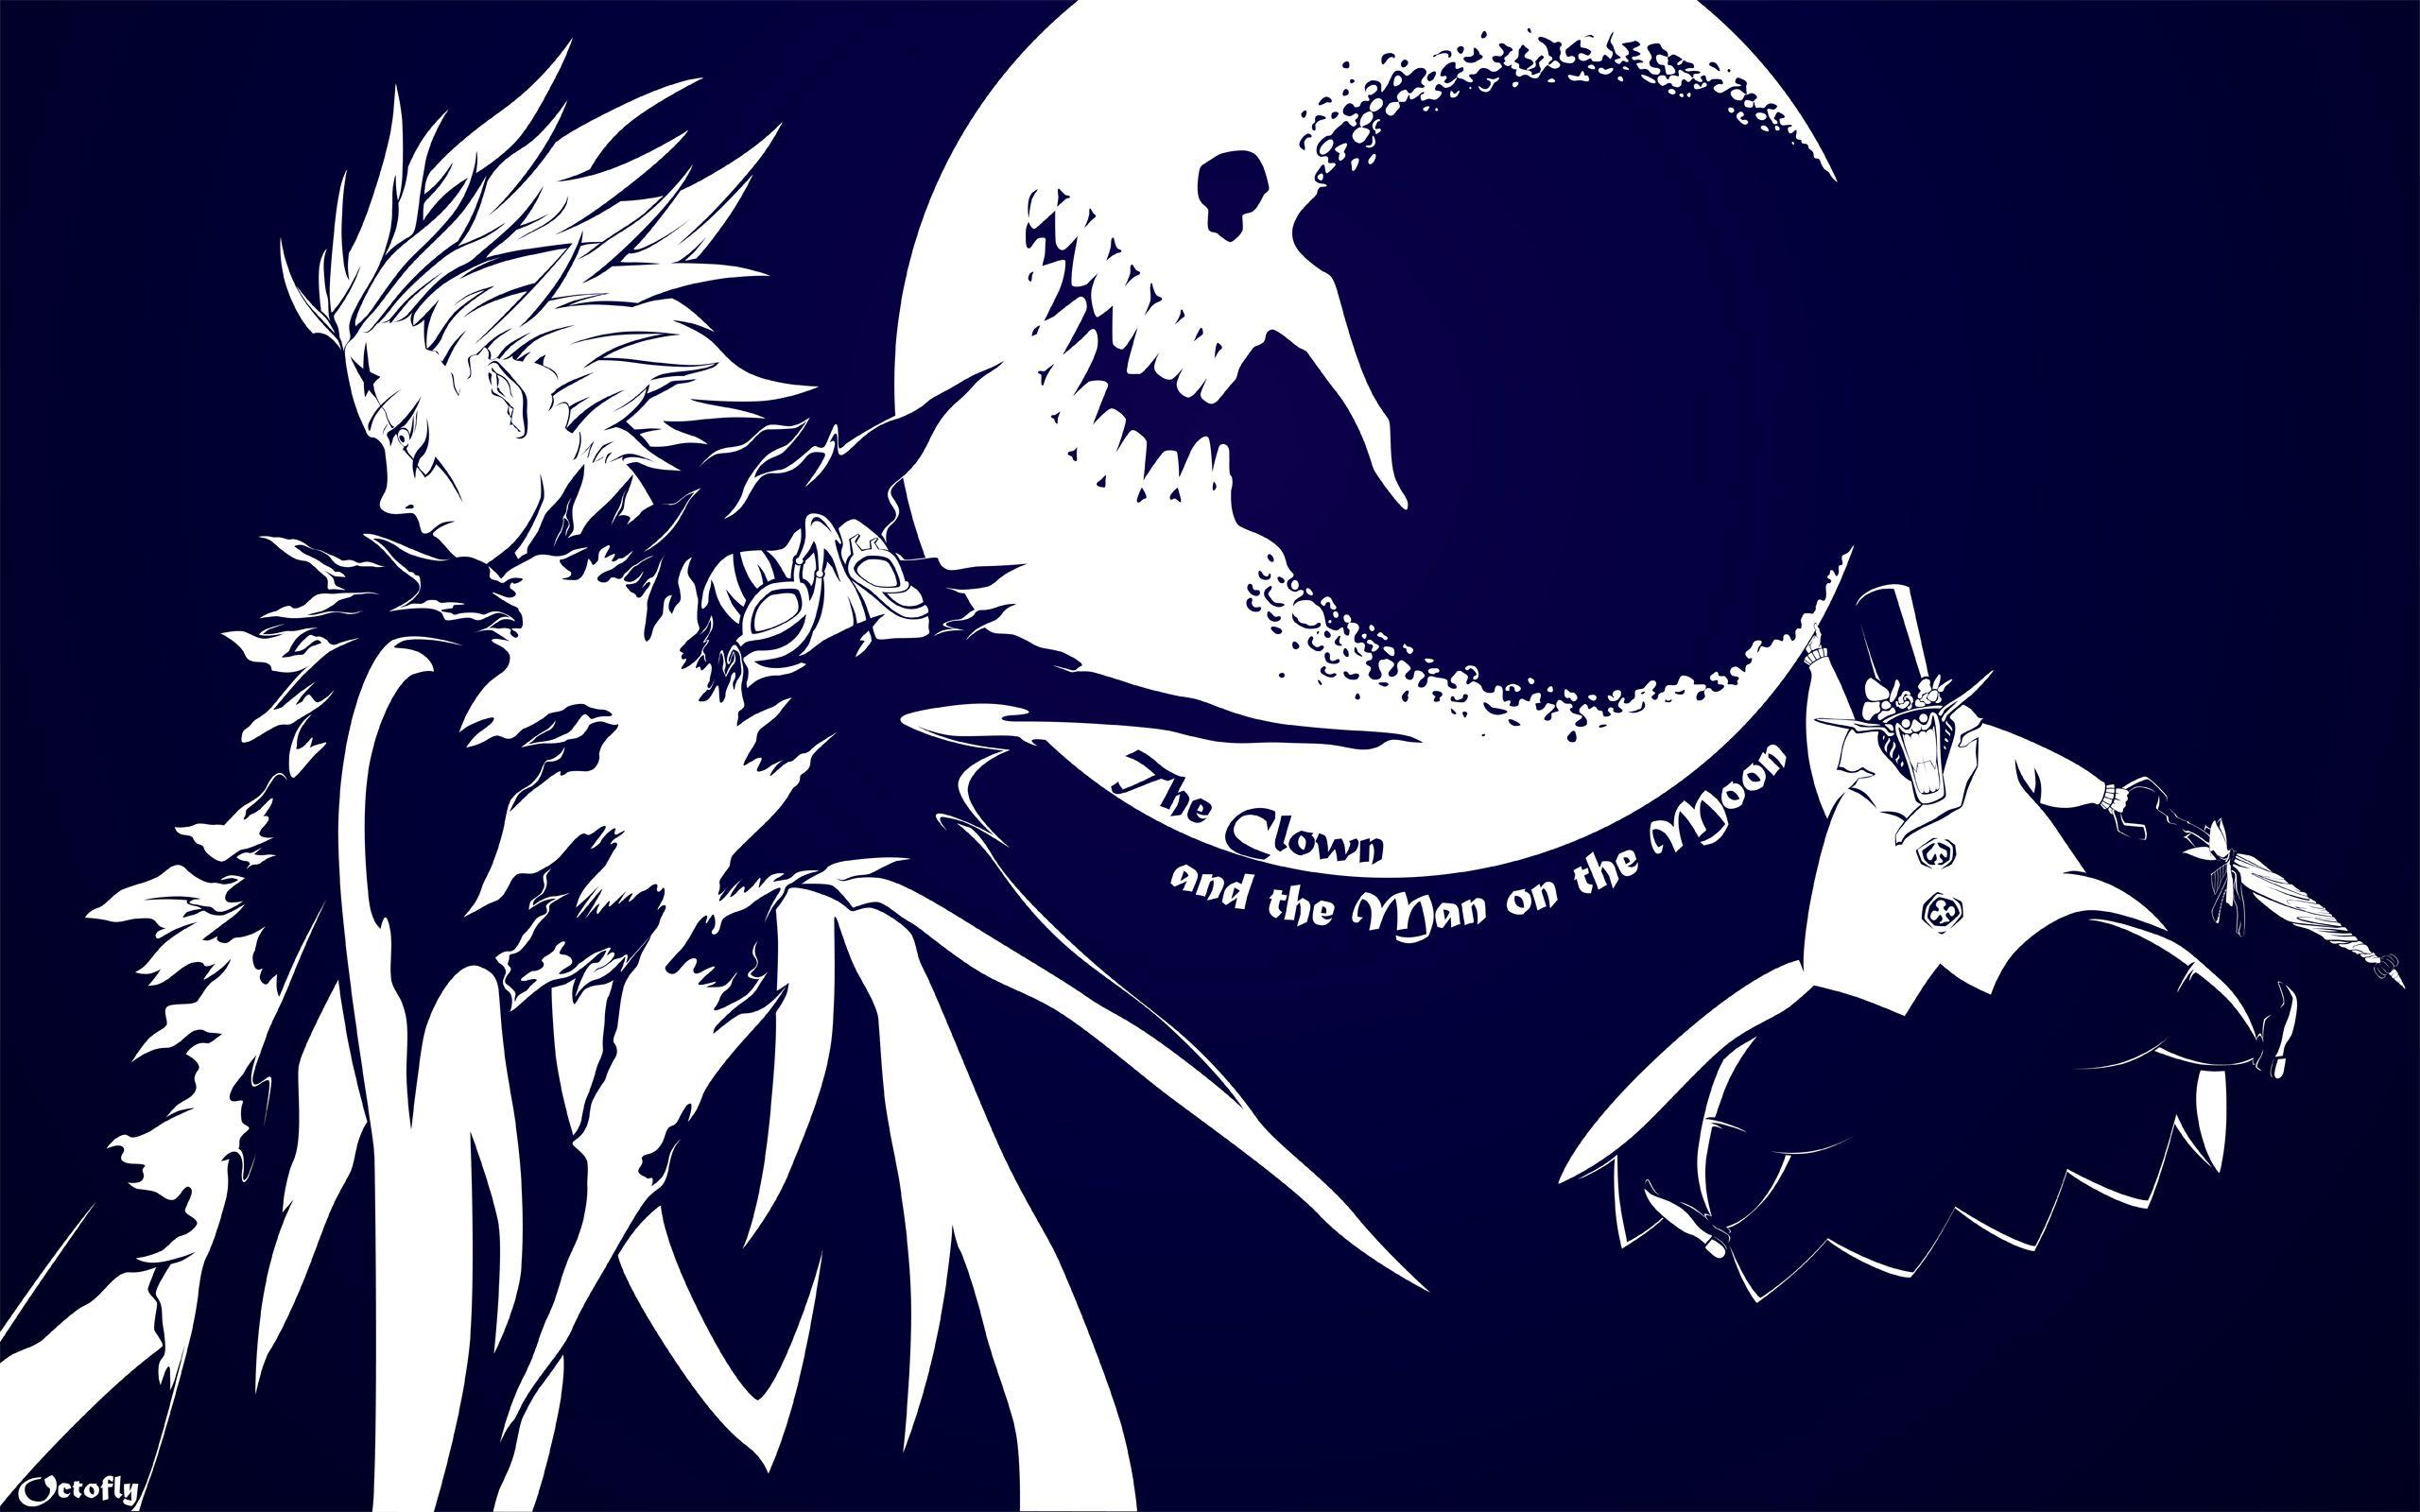 D.Gray Man HD Wallpaper And Background Image